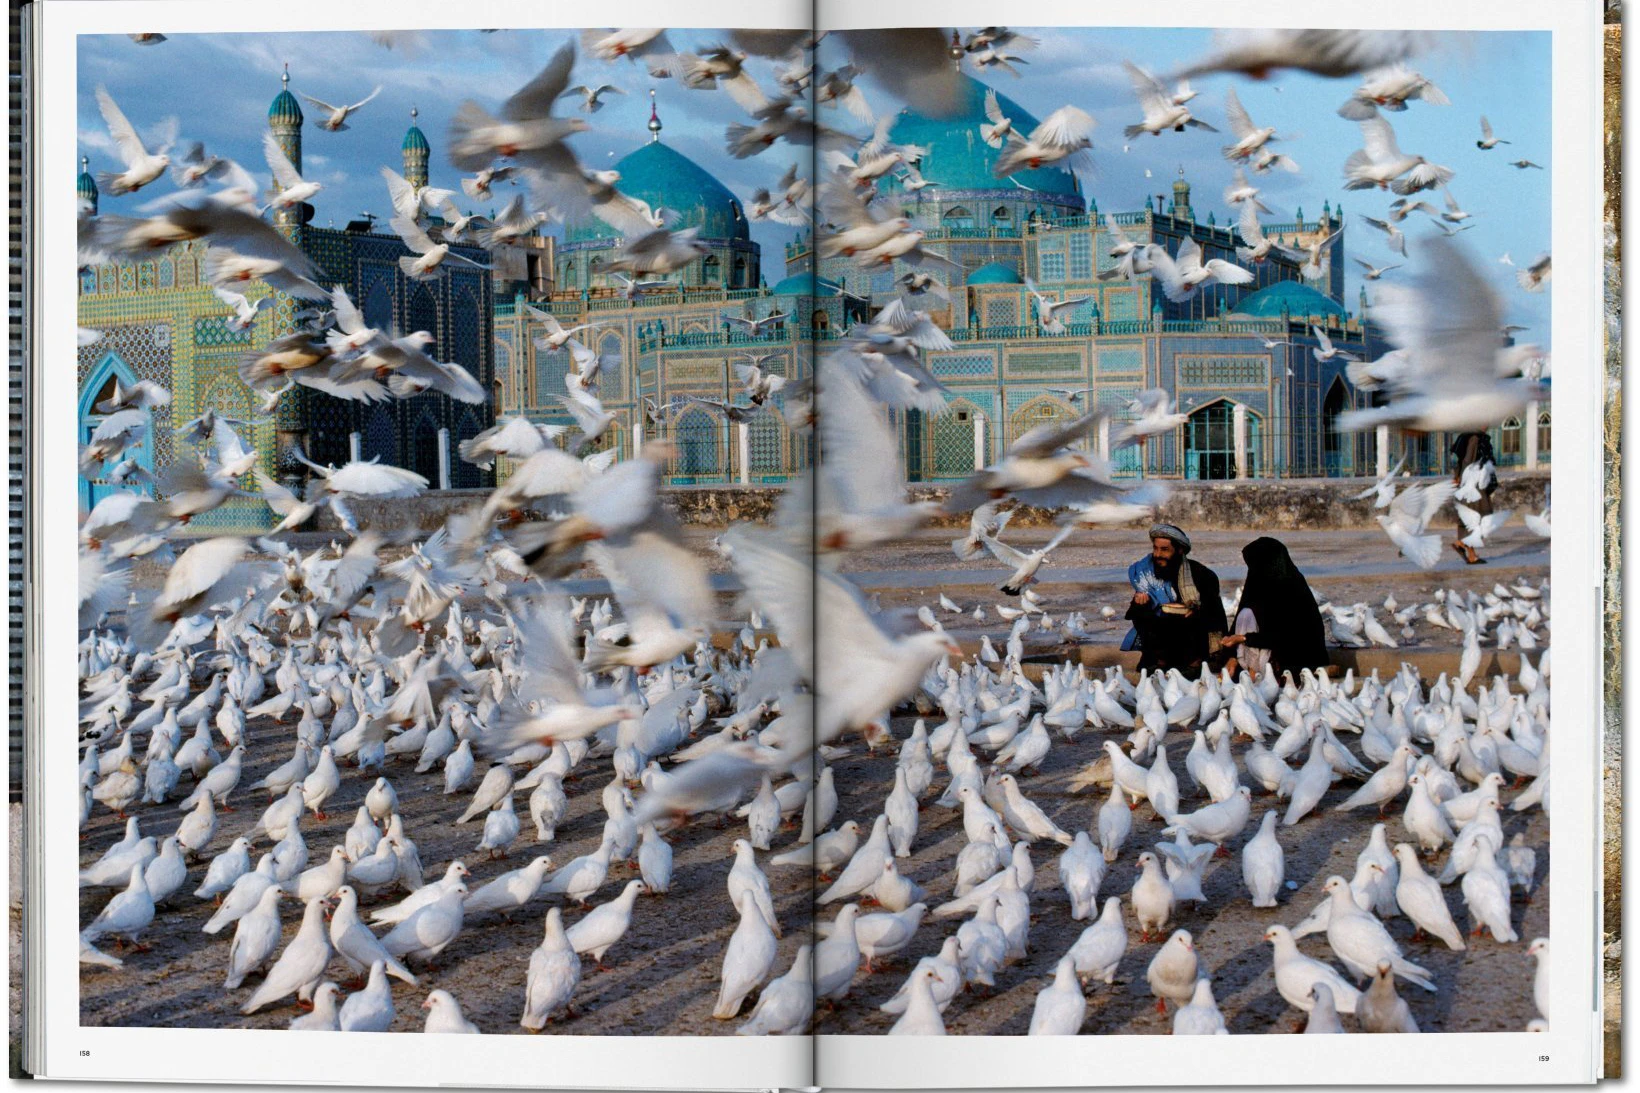 Steve McCurry - Masar-­e Scharif, 1991, Dozens of pigeons fly around two people in the square in front of Hazrat Ali Mazar mosque.